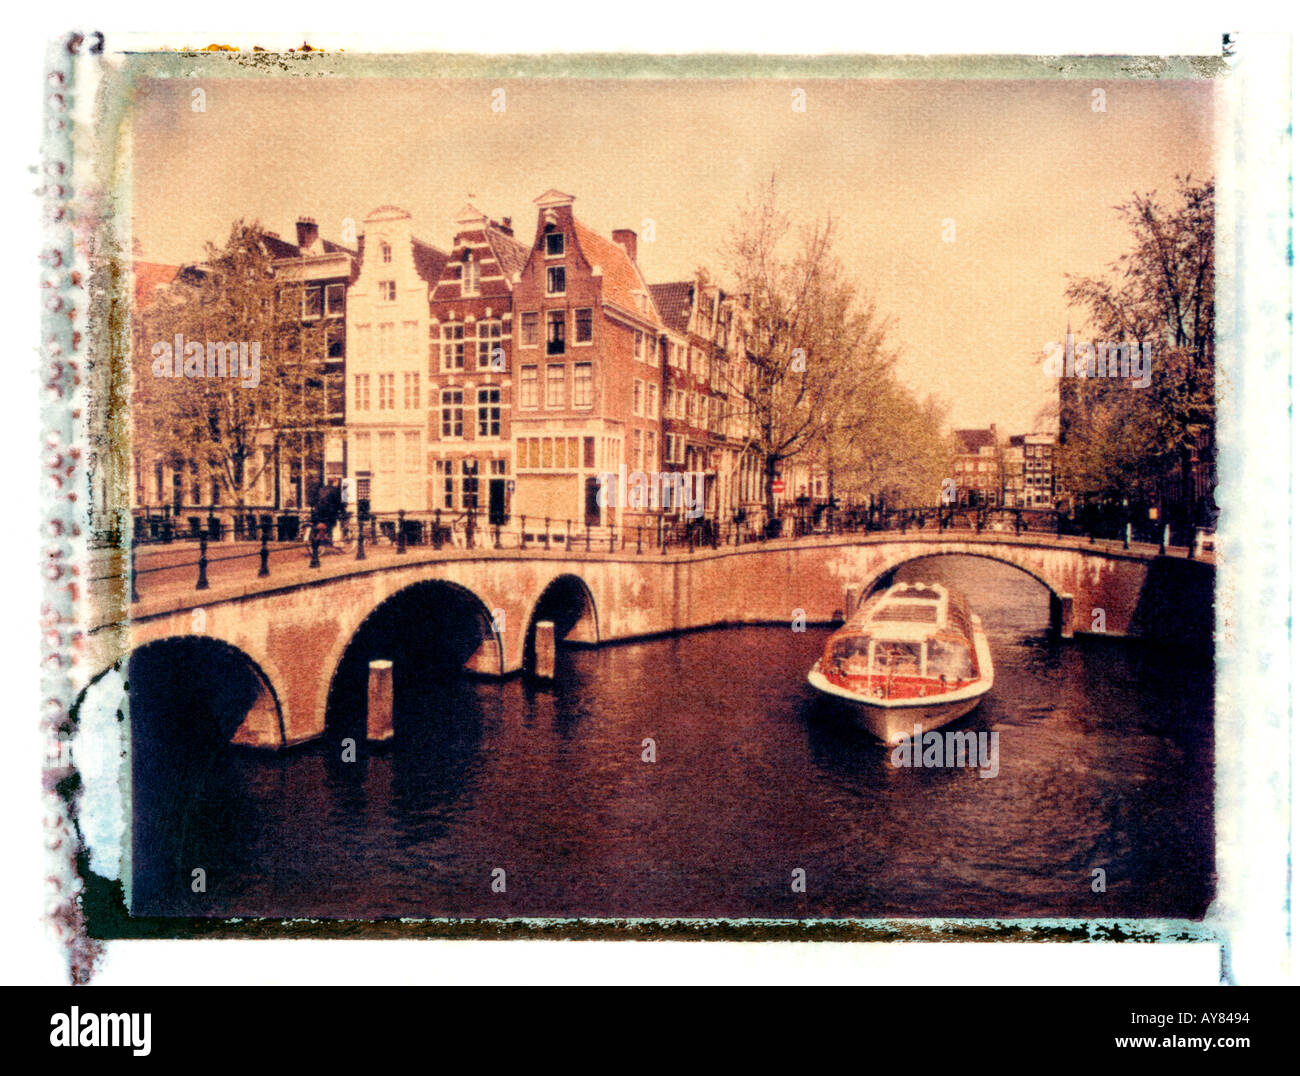 Canal Keizersgracht, Amsterdam, Pays-Bas Banque D'Images